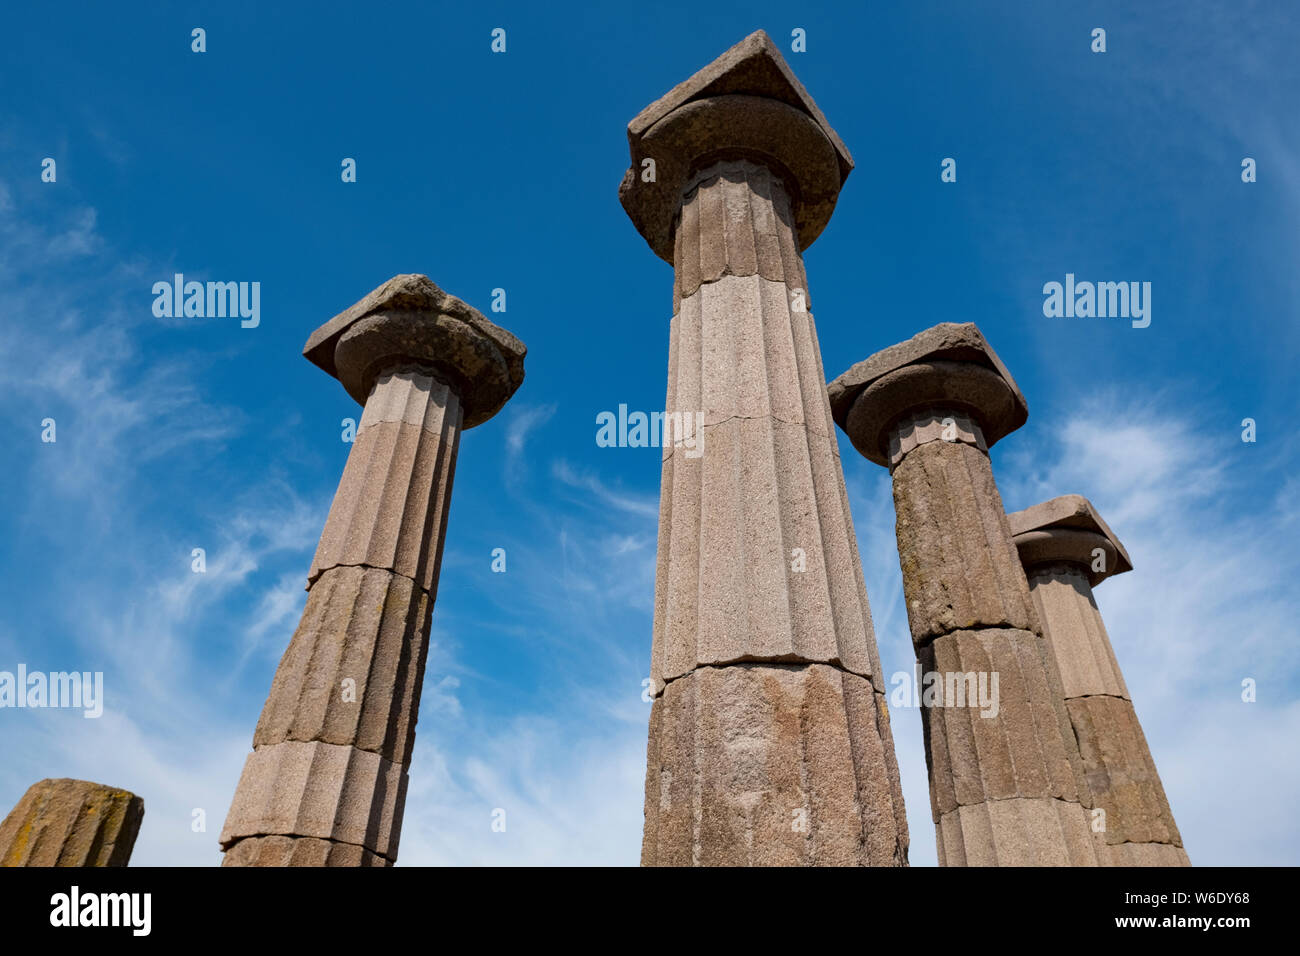 The remaining Doric columns of the ancient Greek Temple of Athena on a hill overlooking the Aegean Sea in present day Behramkale, Turkey Stock Photo